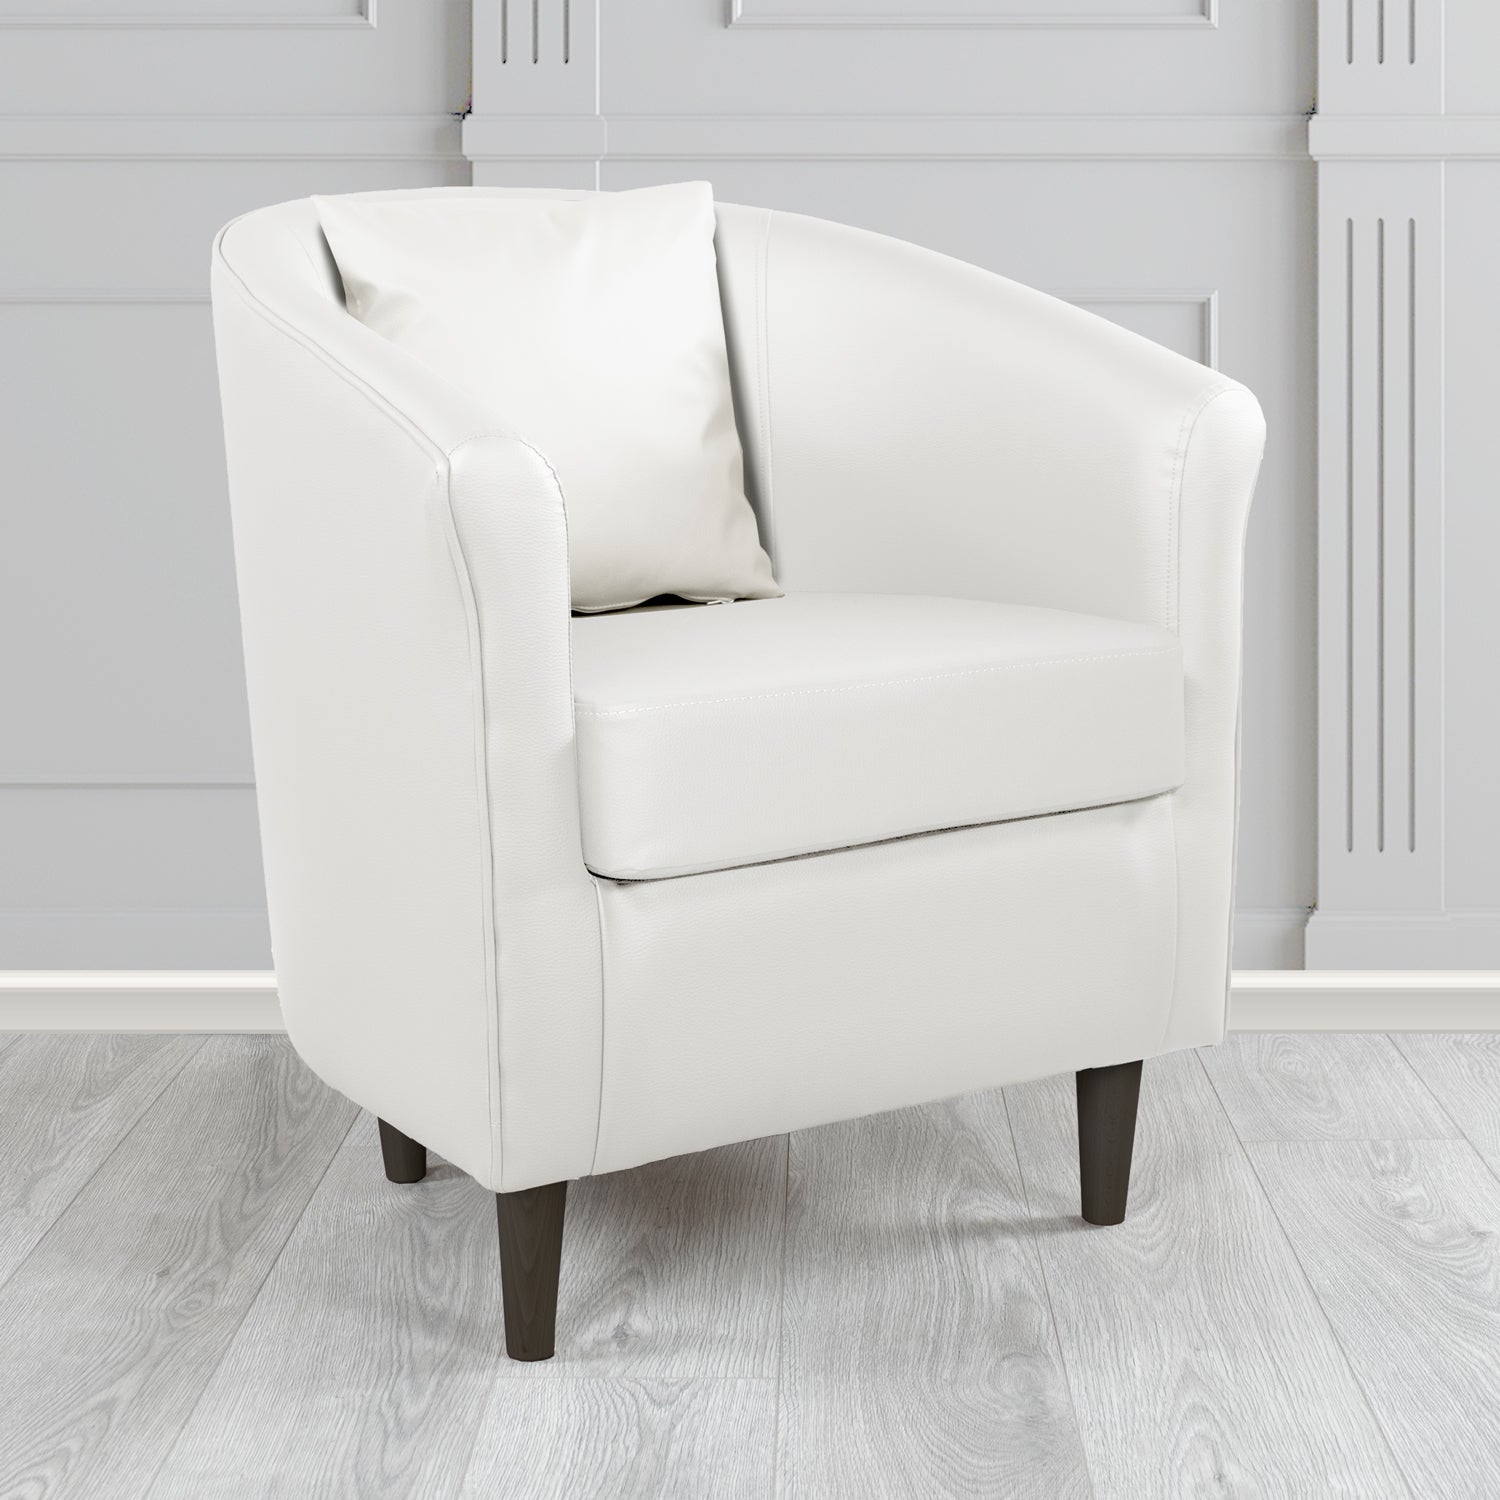 St Tropez Tub Chair with Scatter Cushion in Madrid White Faux Leather